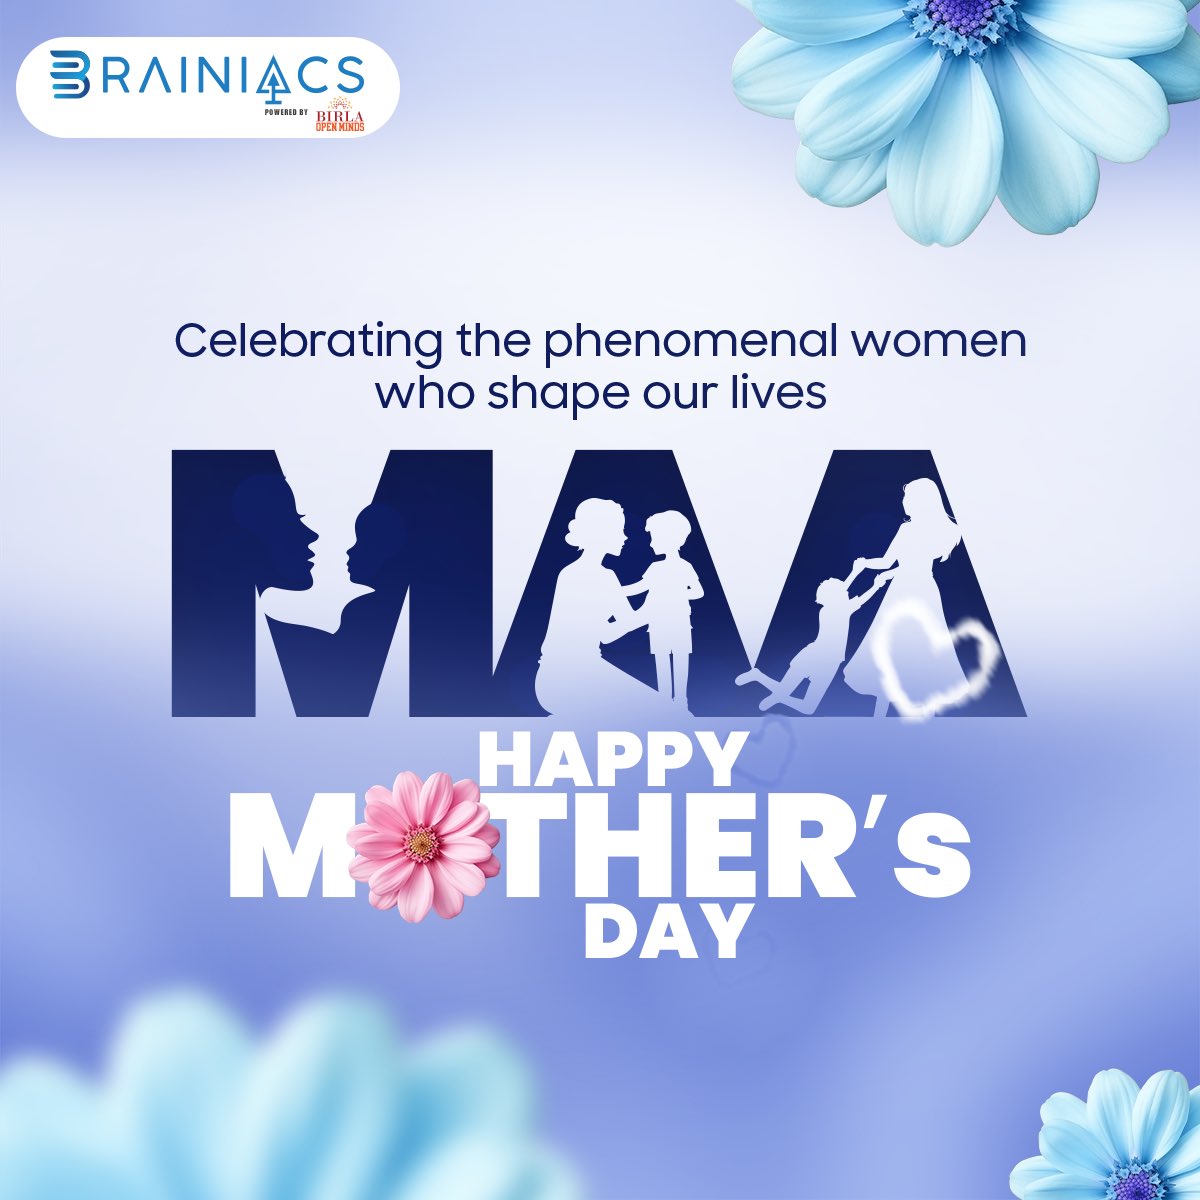 To the women who teach us, inspire us, and love us unconditionally, Happy Mother's Day! 📚❤️

#Brainiacs #BirlaBrainiacs #HybridLearning #Homeschooling #Education #HybridEducation #CambridgeCurriculum #MothersDay #HappyMothersDay #MothersLove